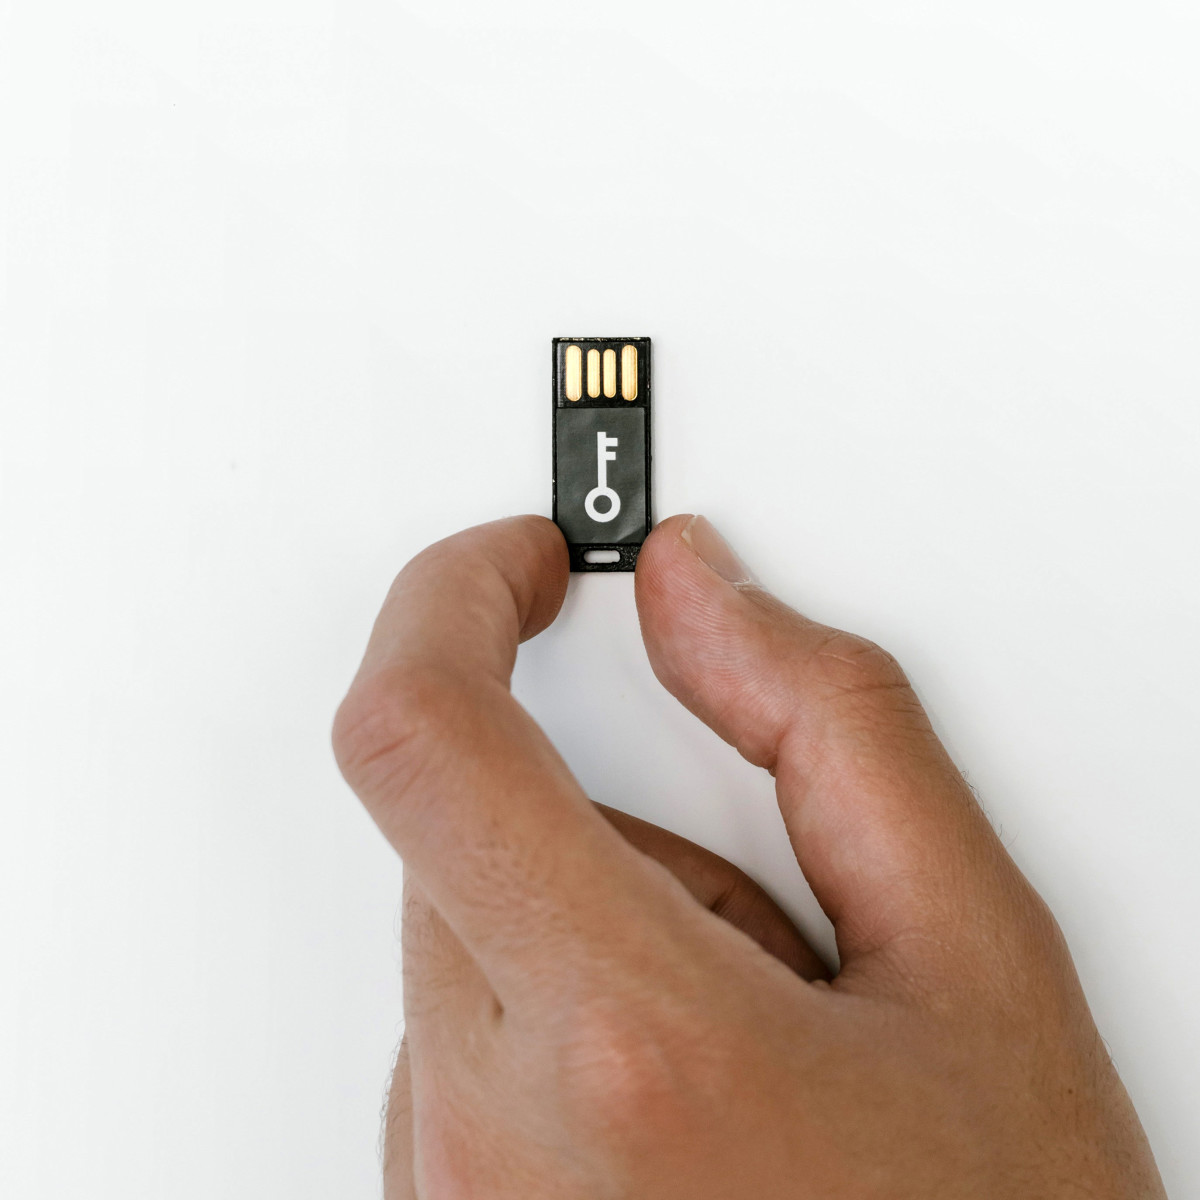 Using a USB drive as a physical key for your computer is a great way to improve your system's security.